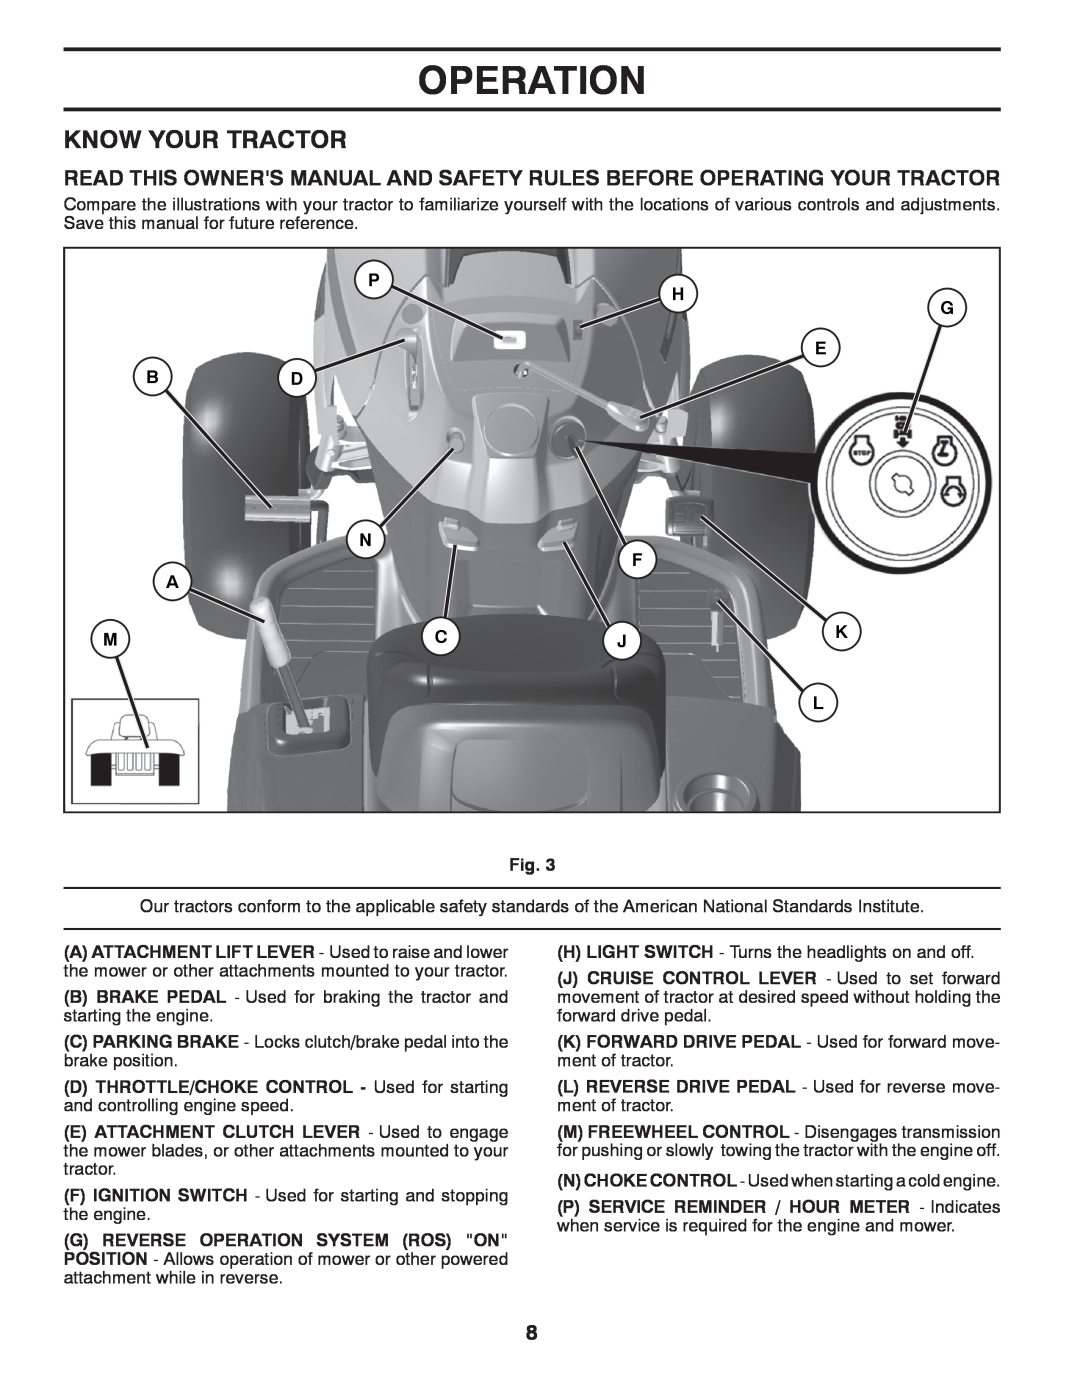 Husqvarna YTH2242 owner manual Know Your Tractor, Operation 